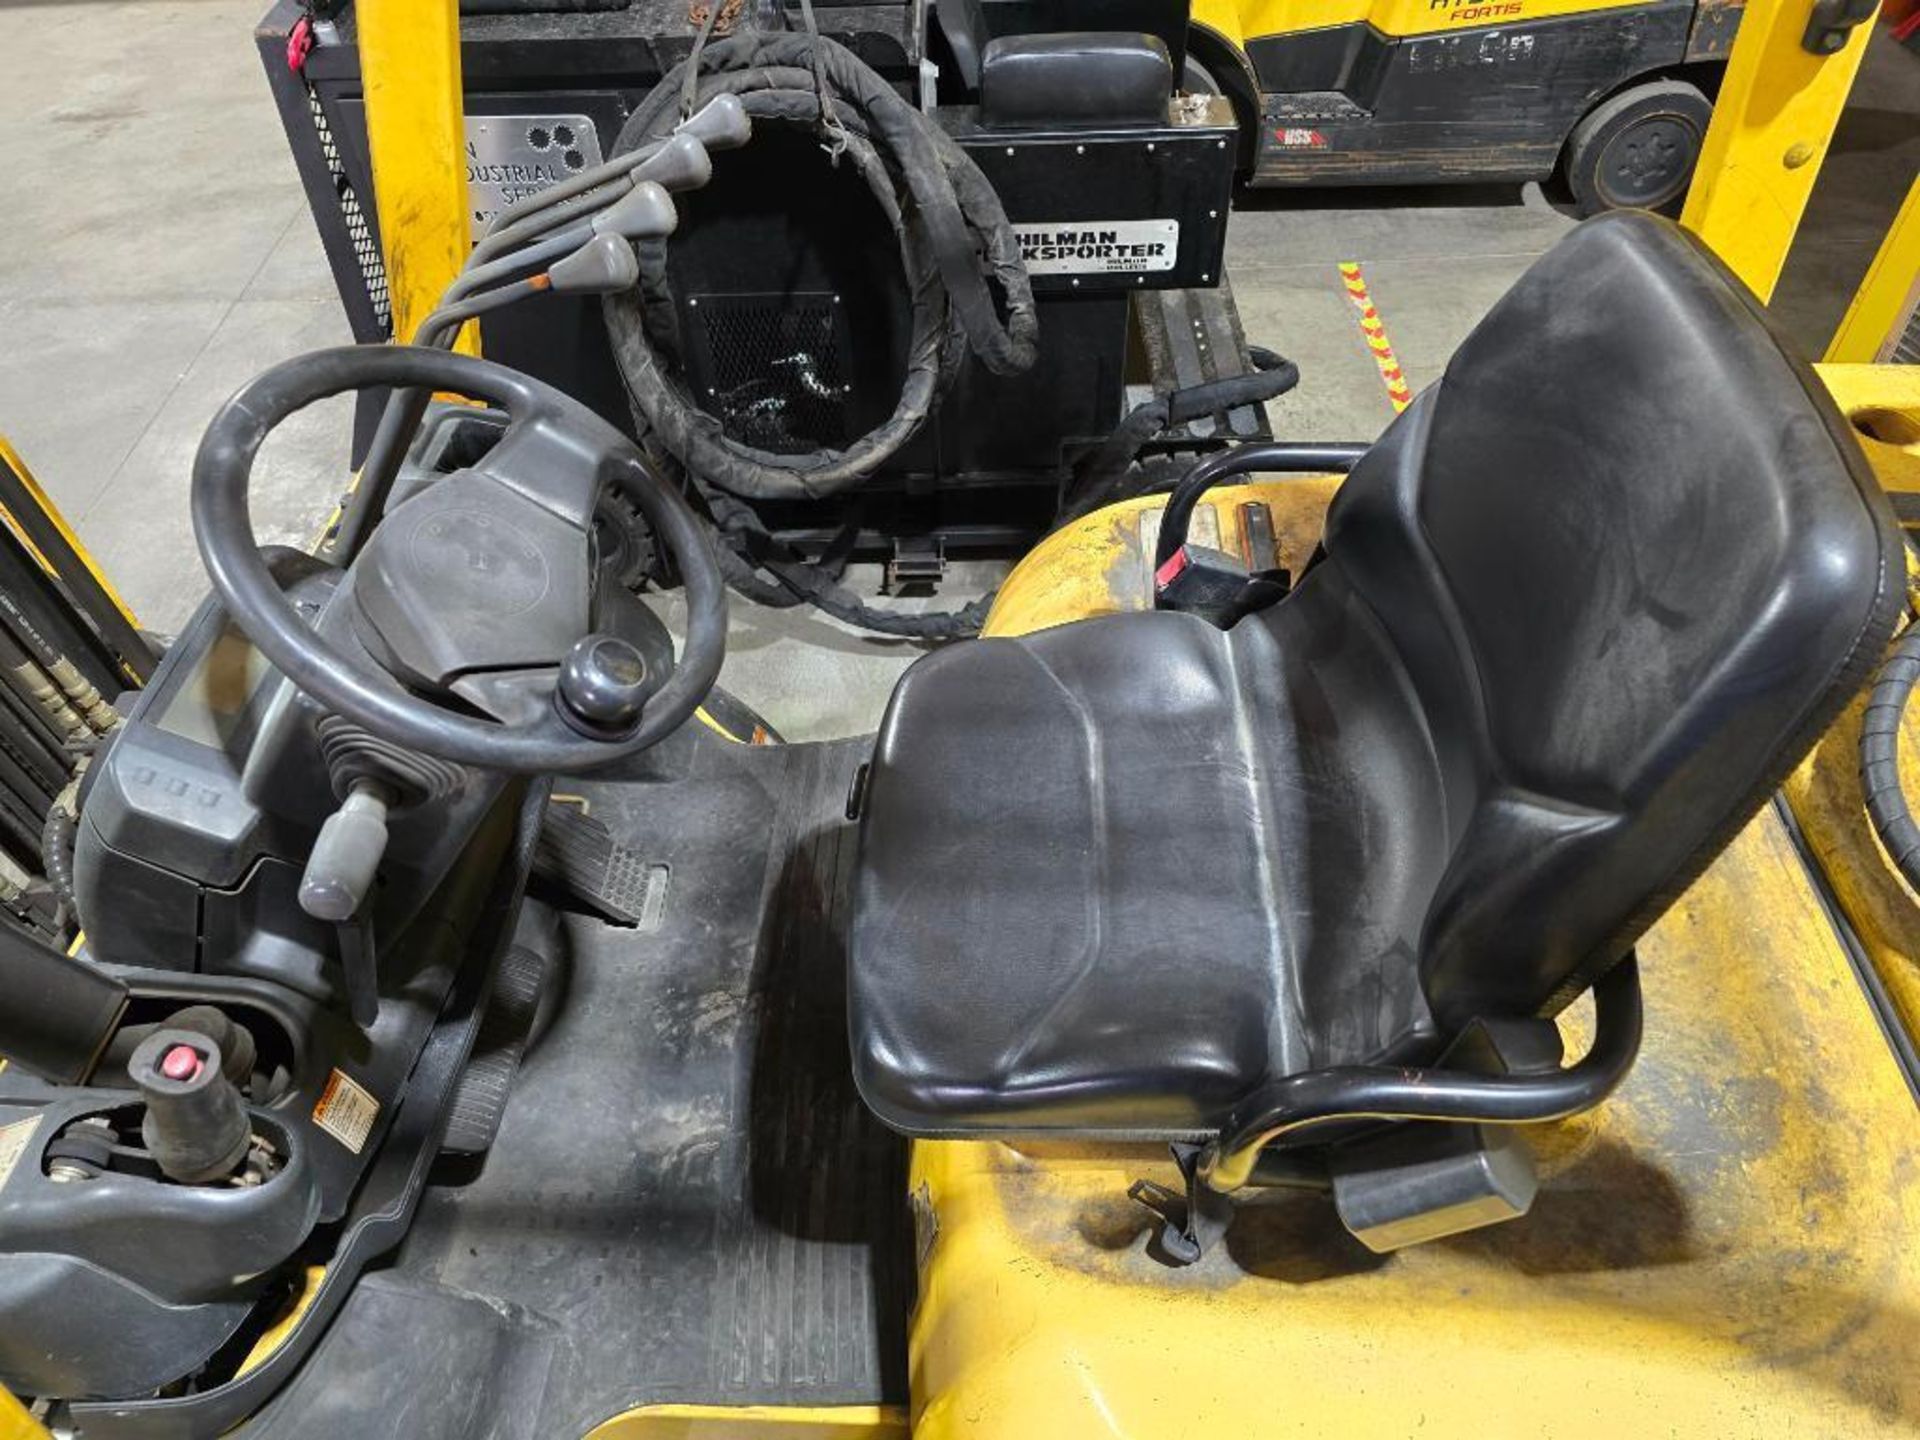 2018 Hyster H50XT 5,000 LB. Forklift, S/N A380V06798S, 195" Lift Height, Solid Cushion Tires, Sidesh - Image 10 of 13